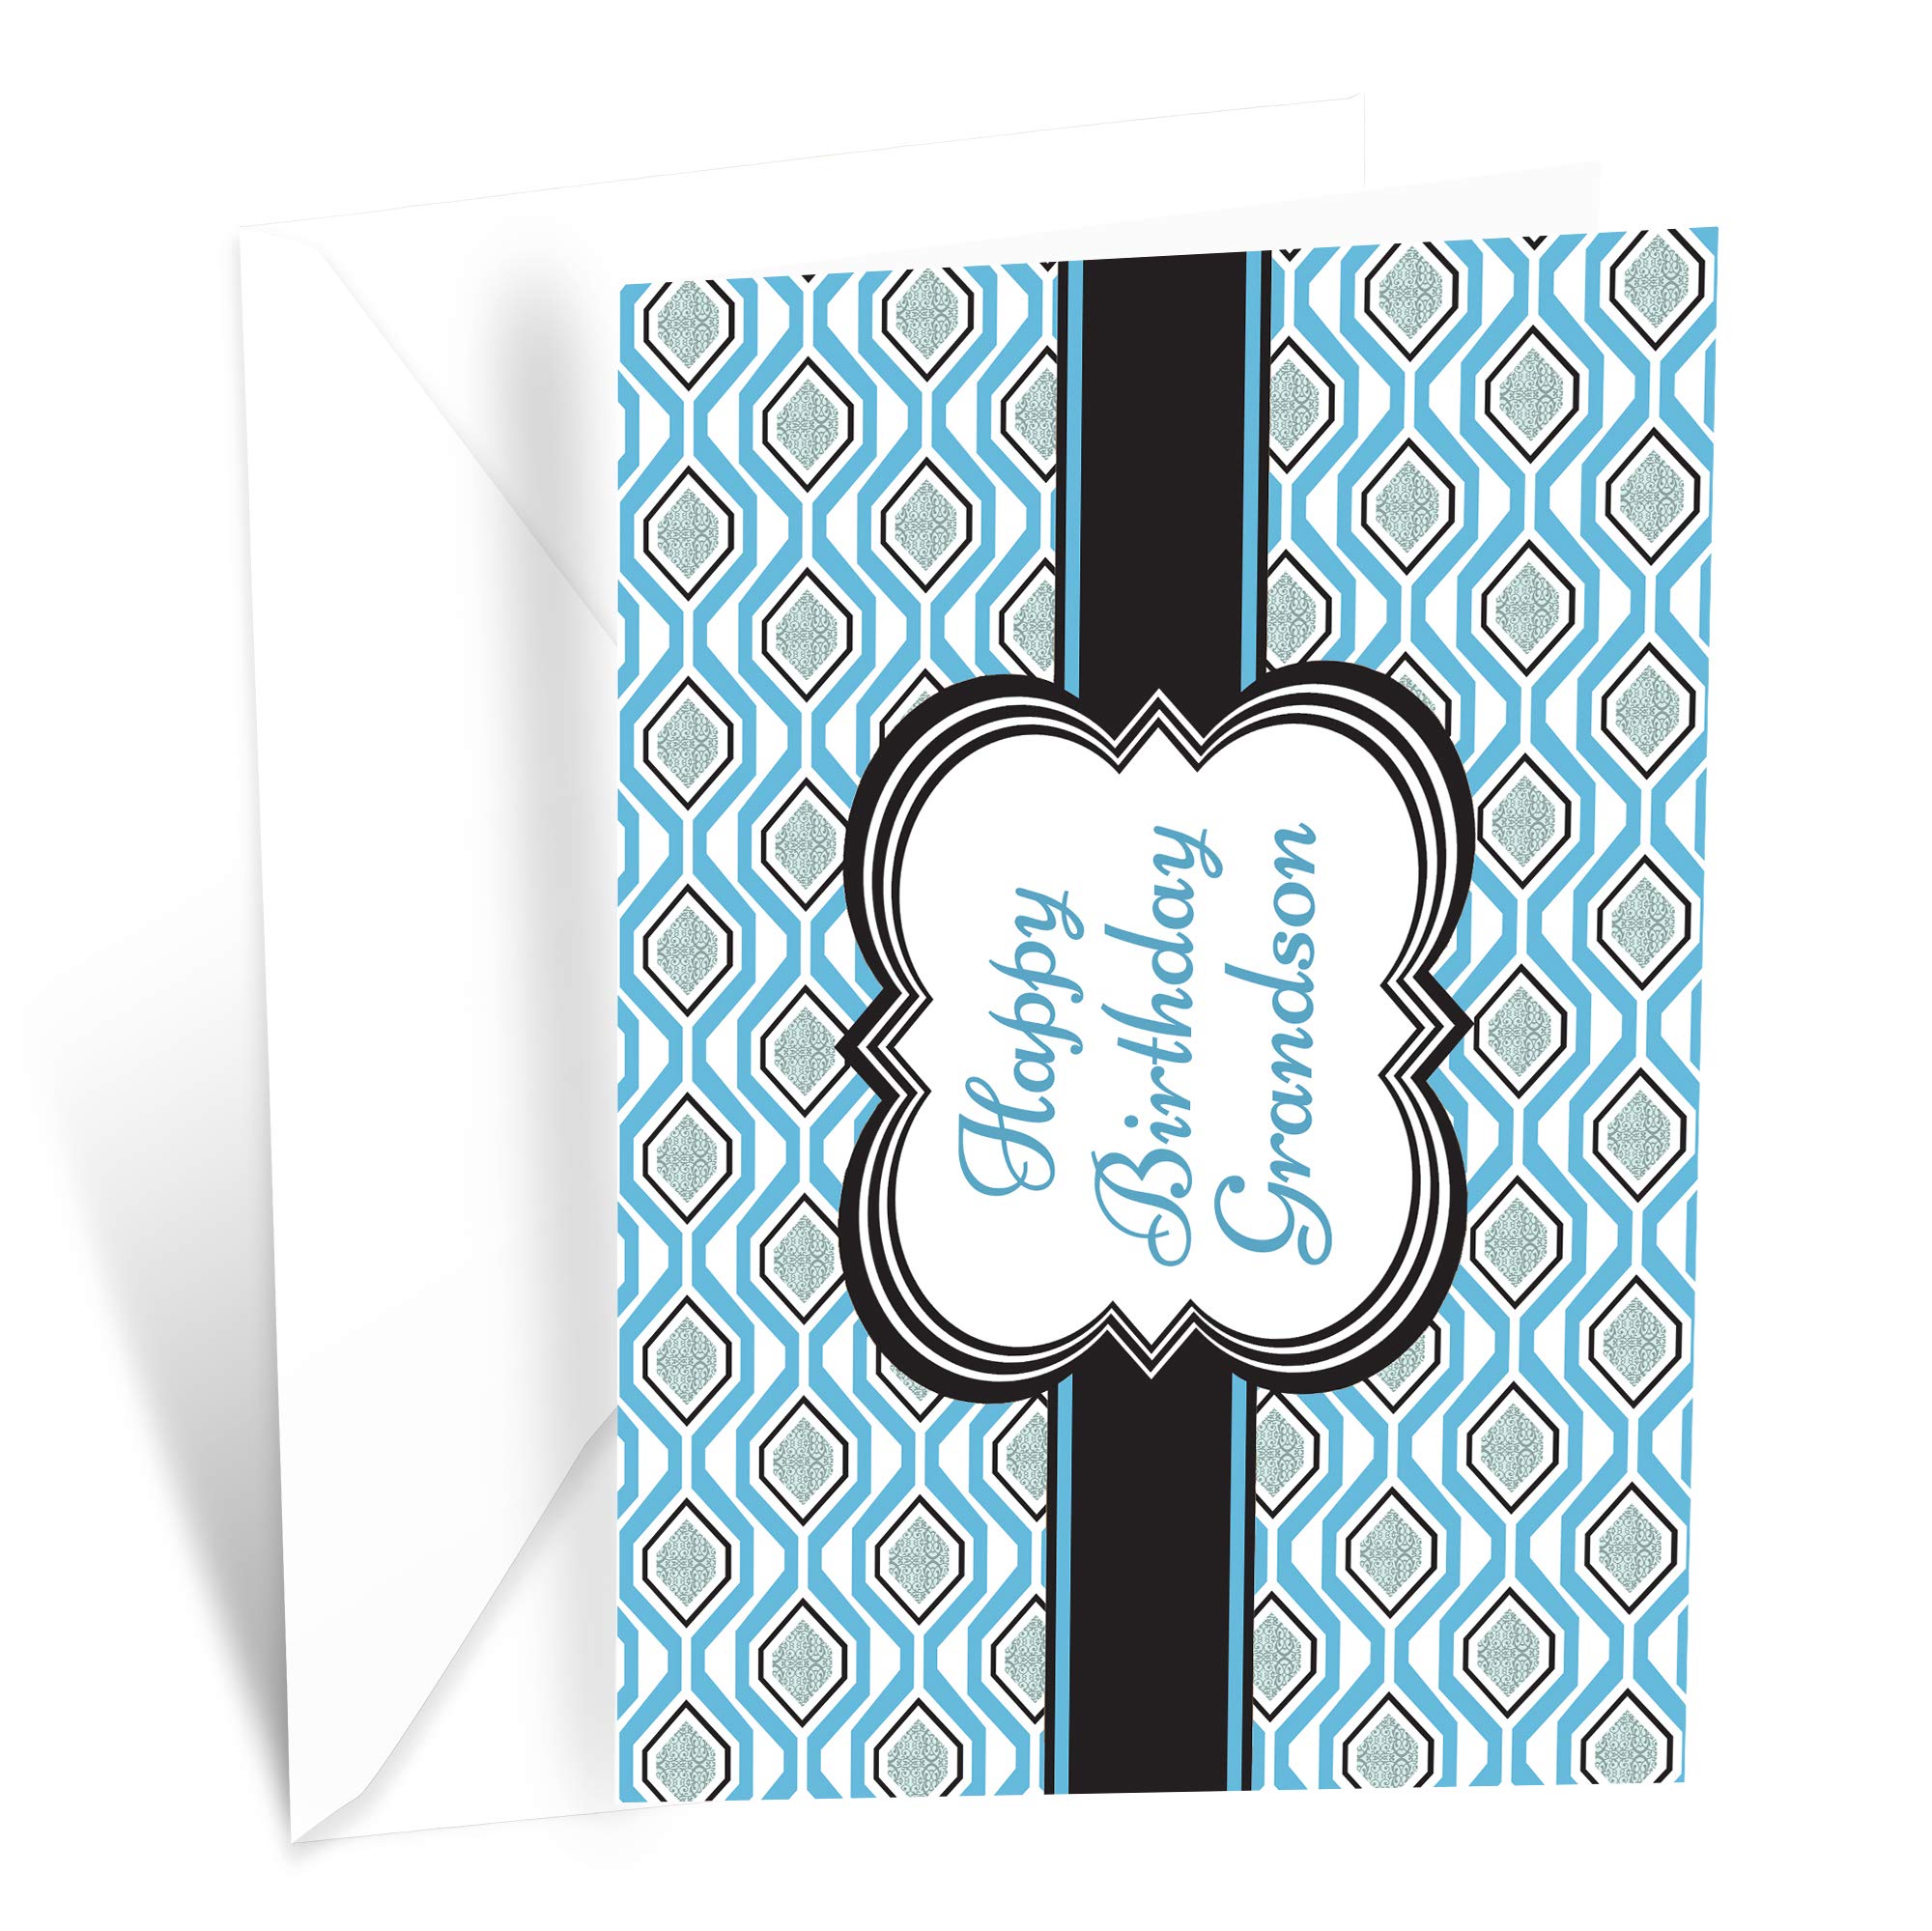 Book Cover Happy Birthday Greeting Card For Grandson | Made in America | Eco-Friendly | Thick Card Stock with Premium Envelope 5in x 7.75in | Packaged in Protective Mailer | Prime Greetings